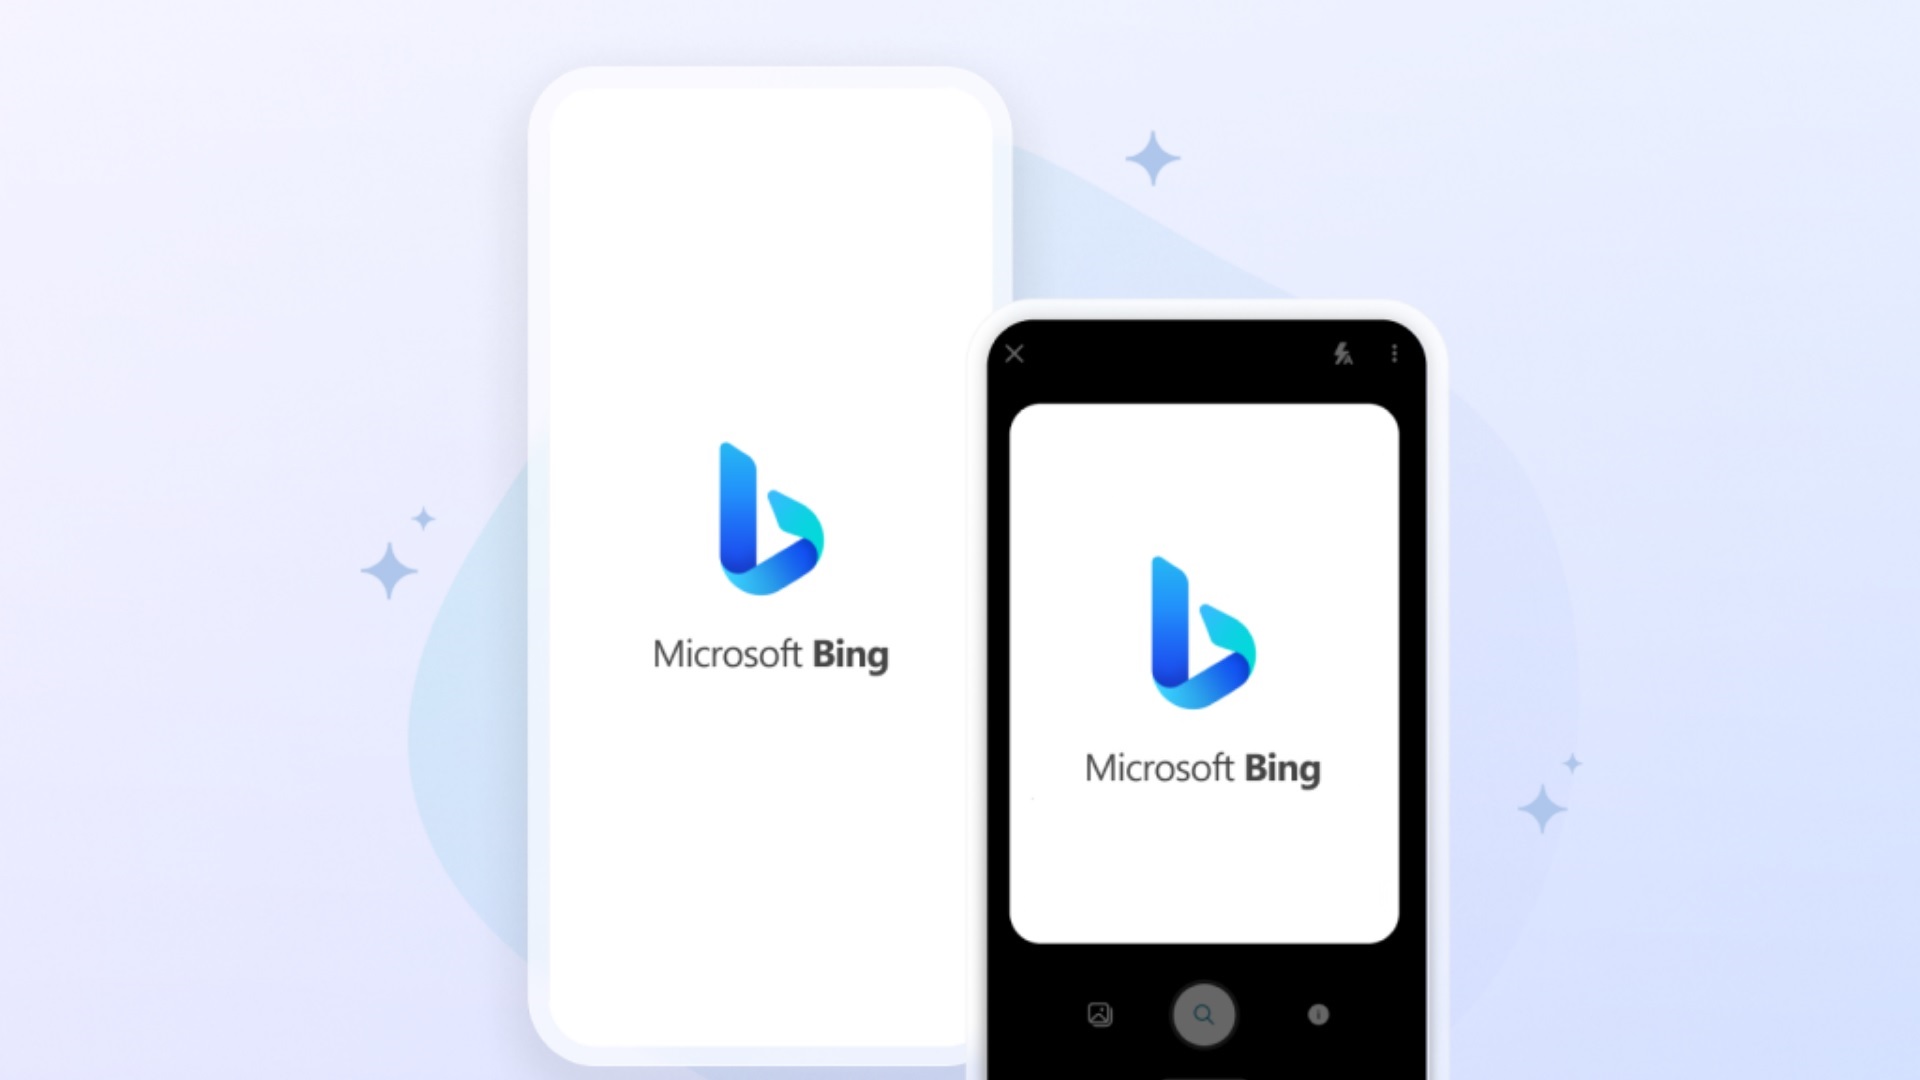 Microsoft is rolling out a series of updates to Bing Chat and Edge on mobile devices with improved features on core AI